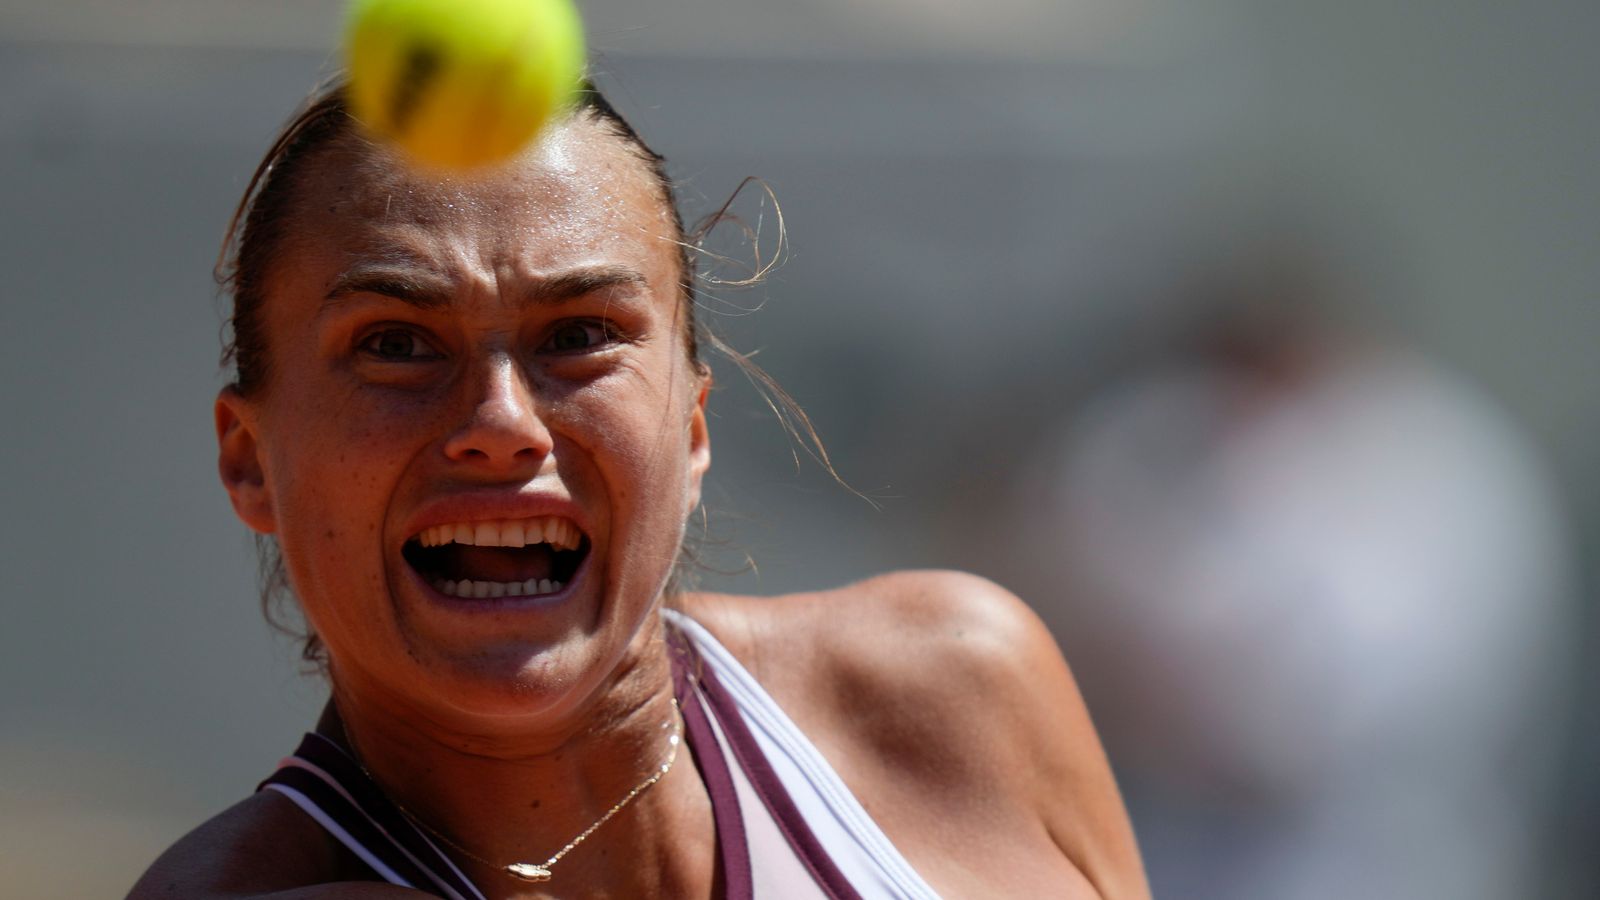 French Open: Aryna Sabalenka skips post-match press conference citing ‘mental health’ and safety concerns | Tennis News